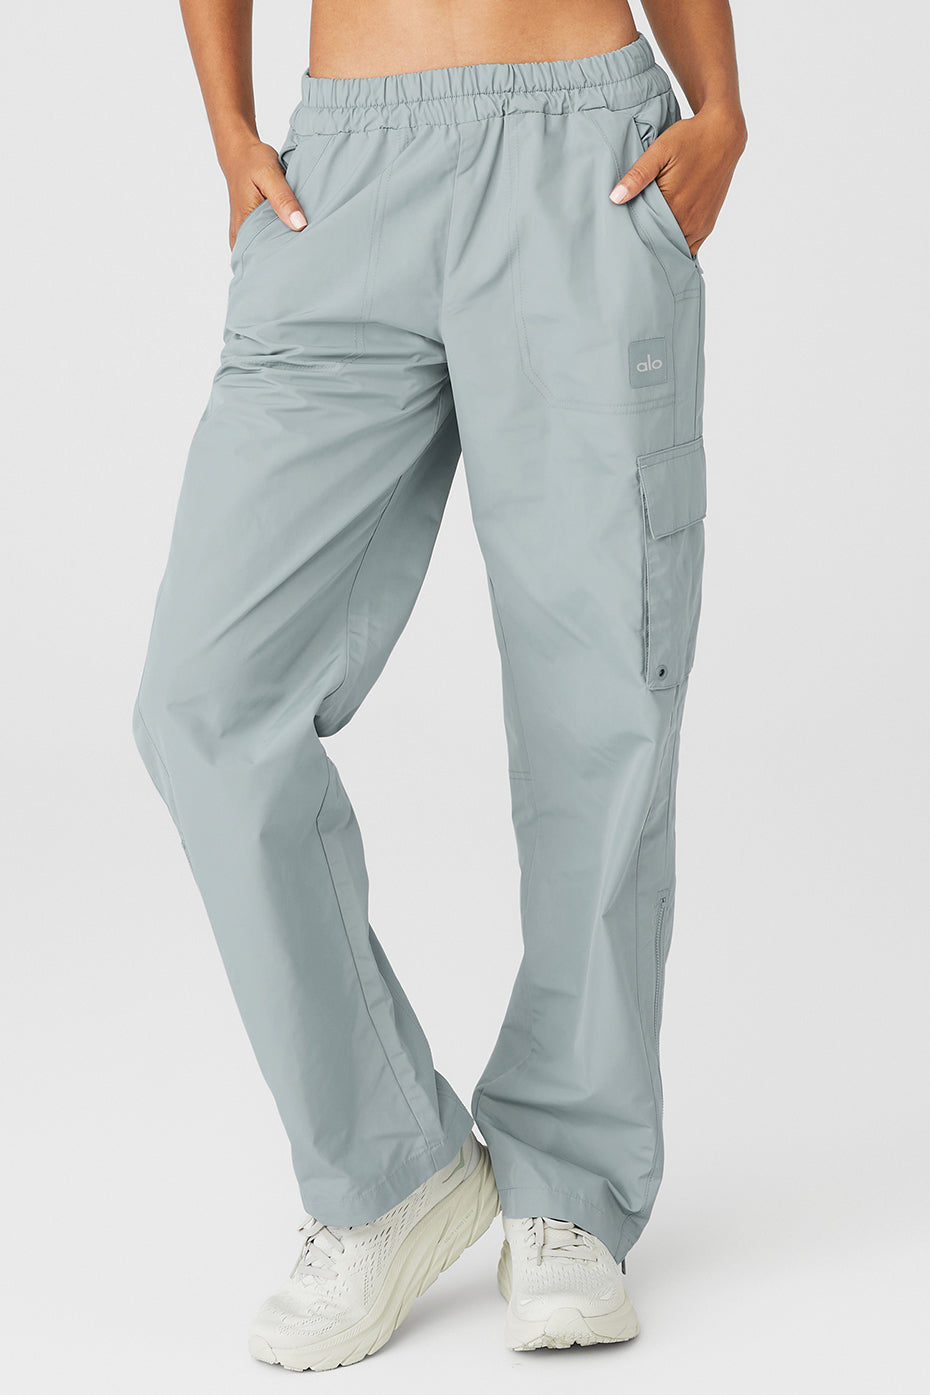 The Alo Pursuit pants are so worth it. wrinkle proof, amazing for trav